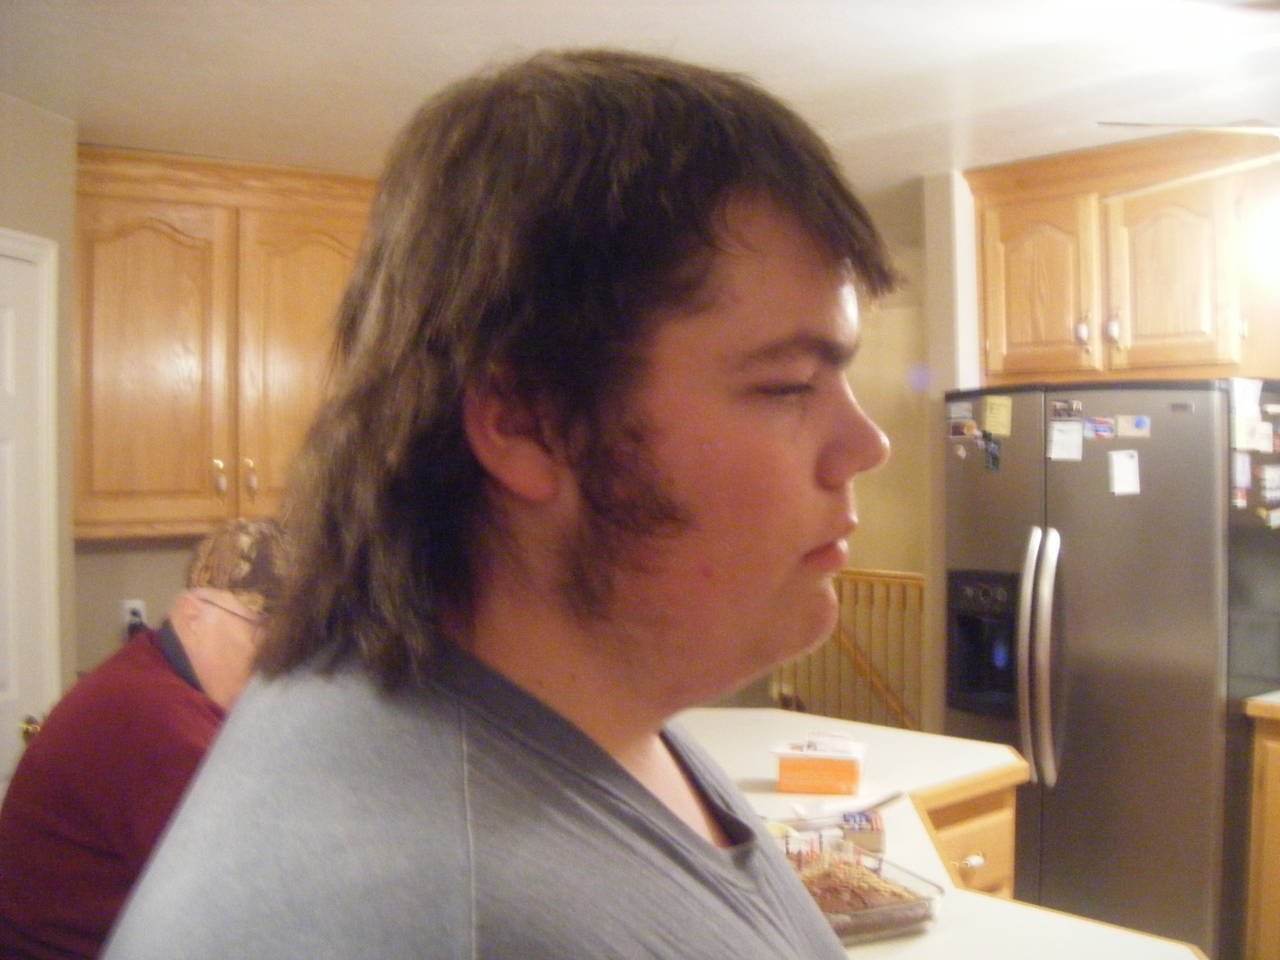 Me with my best attempt at a mullet